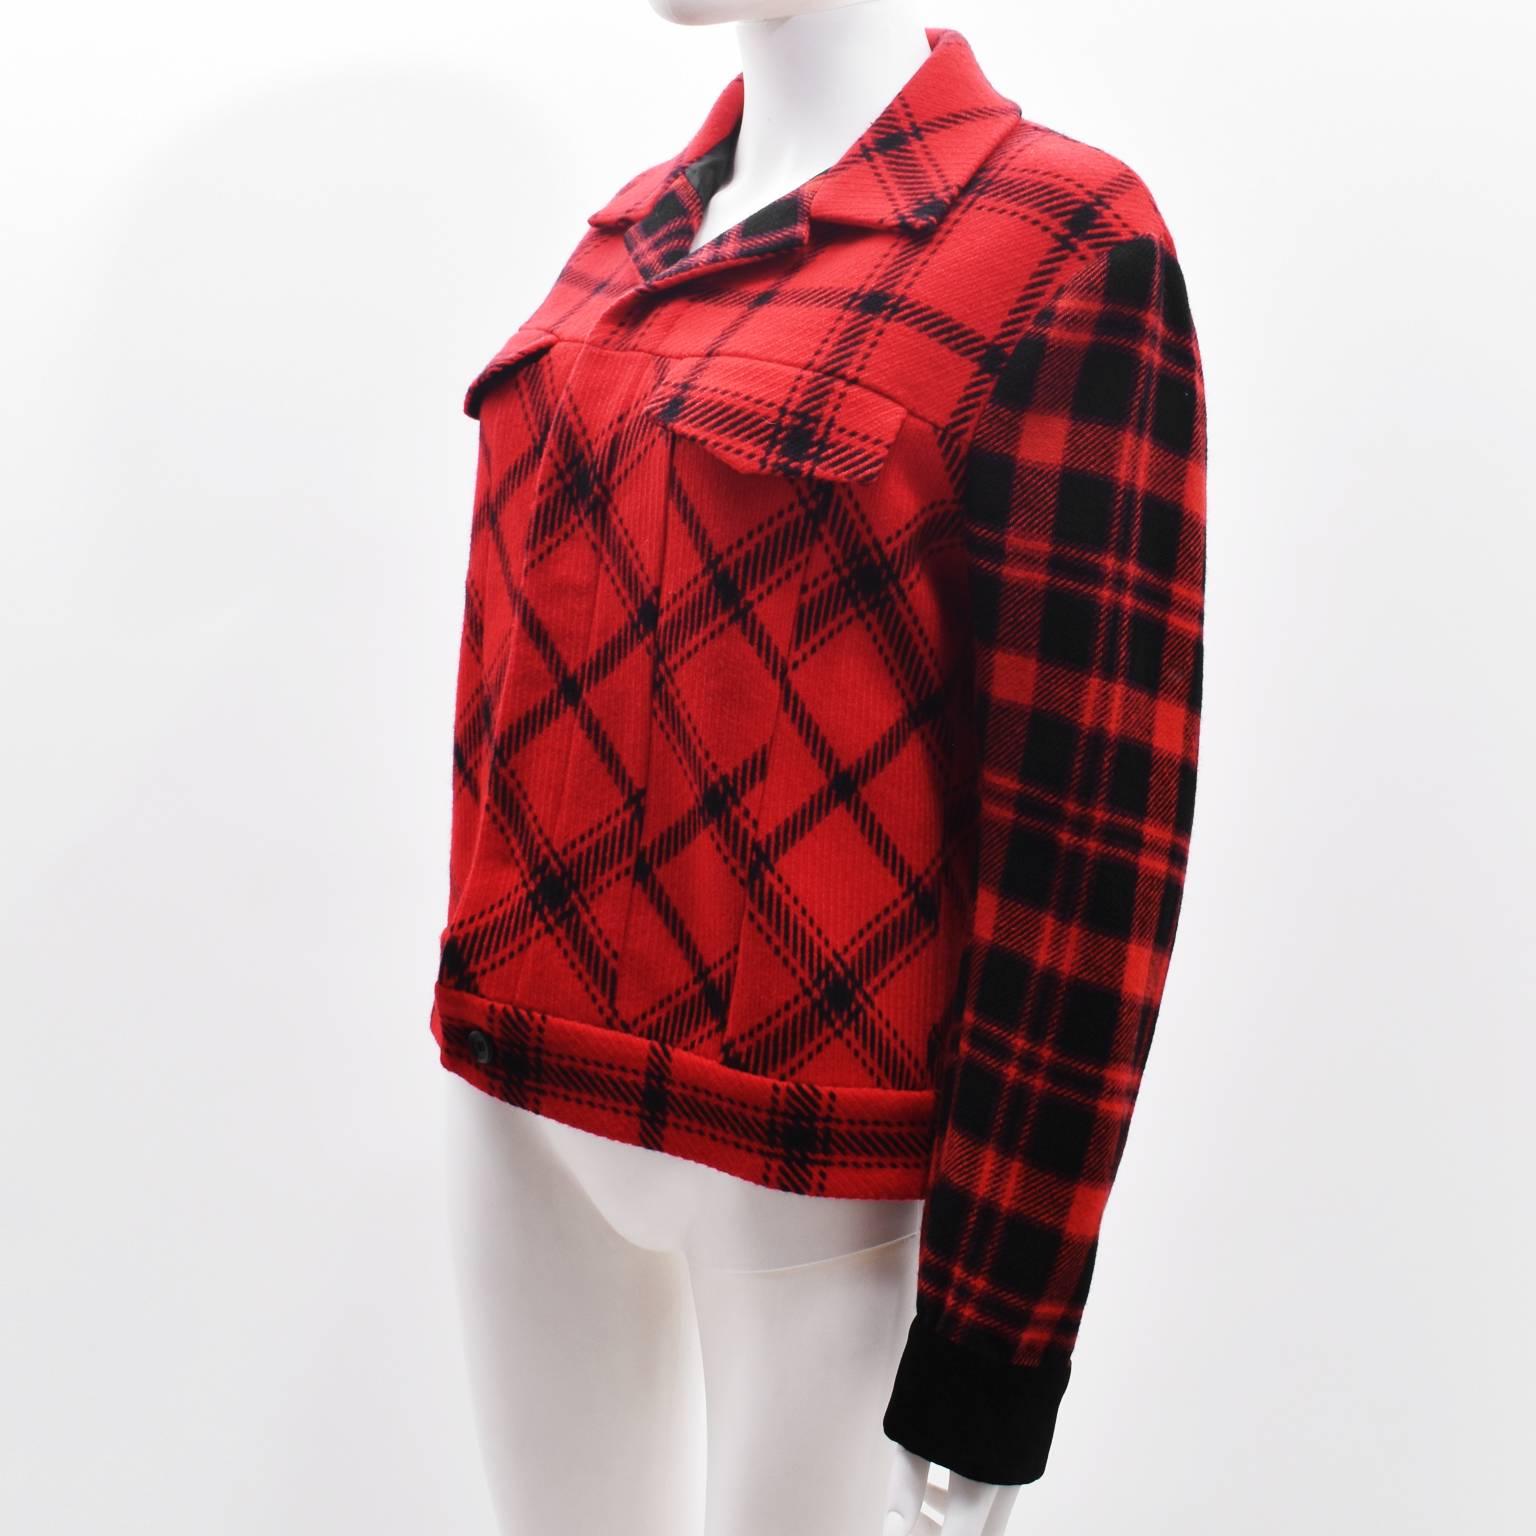 A vibrant and beautiful red and black check print jacket by Yohji Yamamoto. The jacket has a cropped, boxy shape with long sleeves, notched collar and two flap pockets on the chest. It is made from a warm wool and nylon blend, with a diamond design